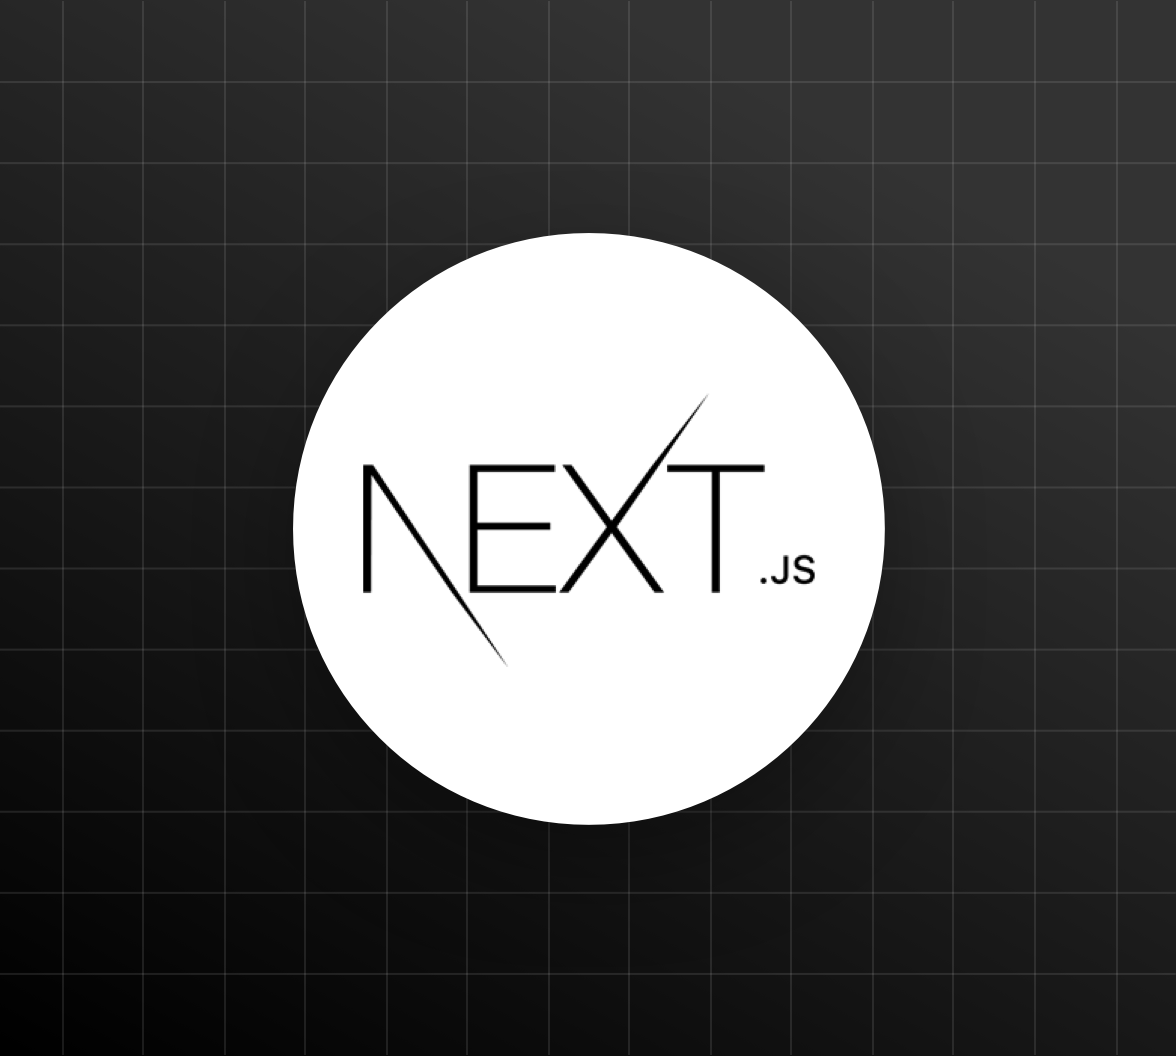 Getting started with next js